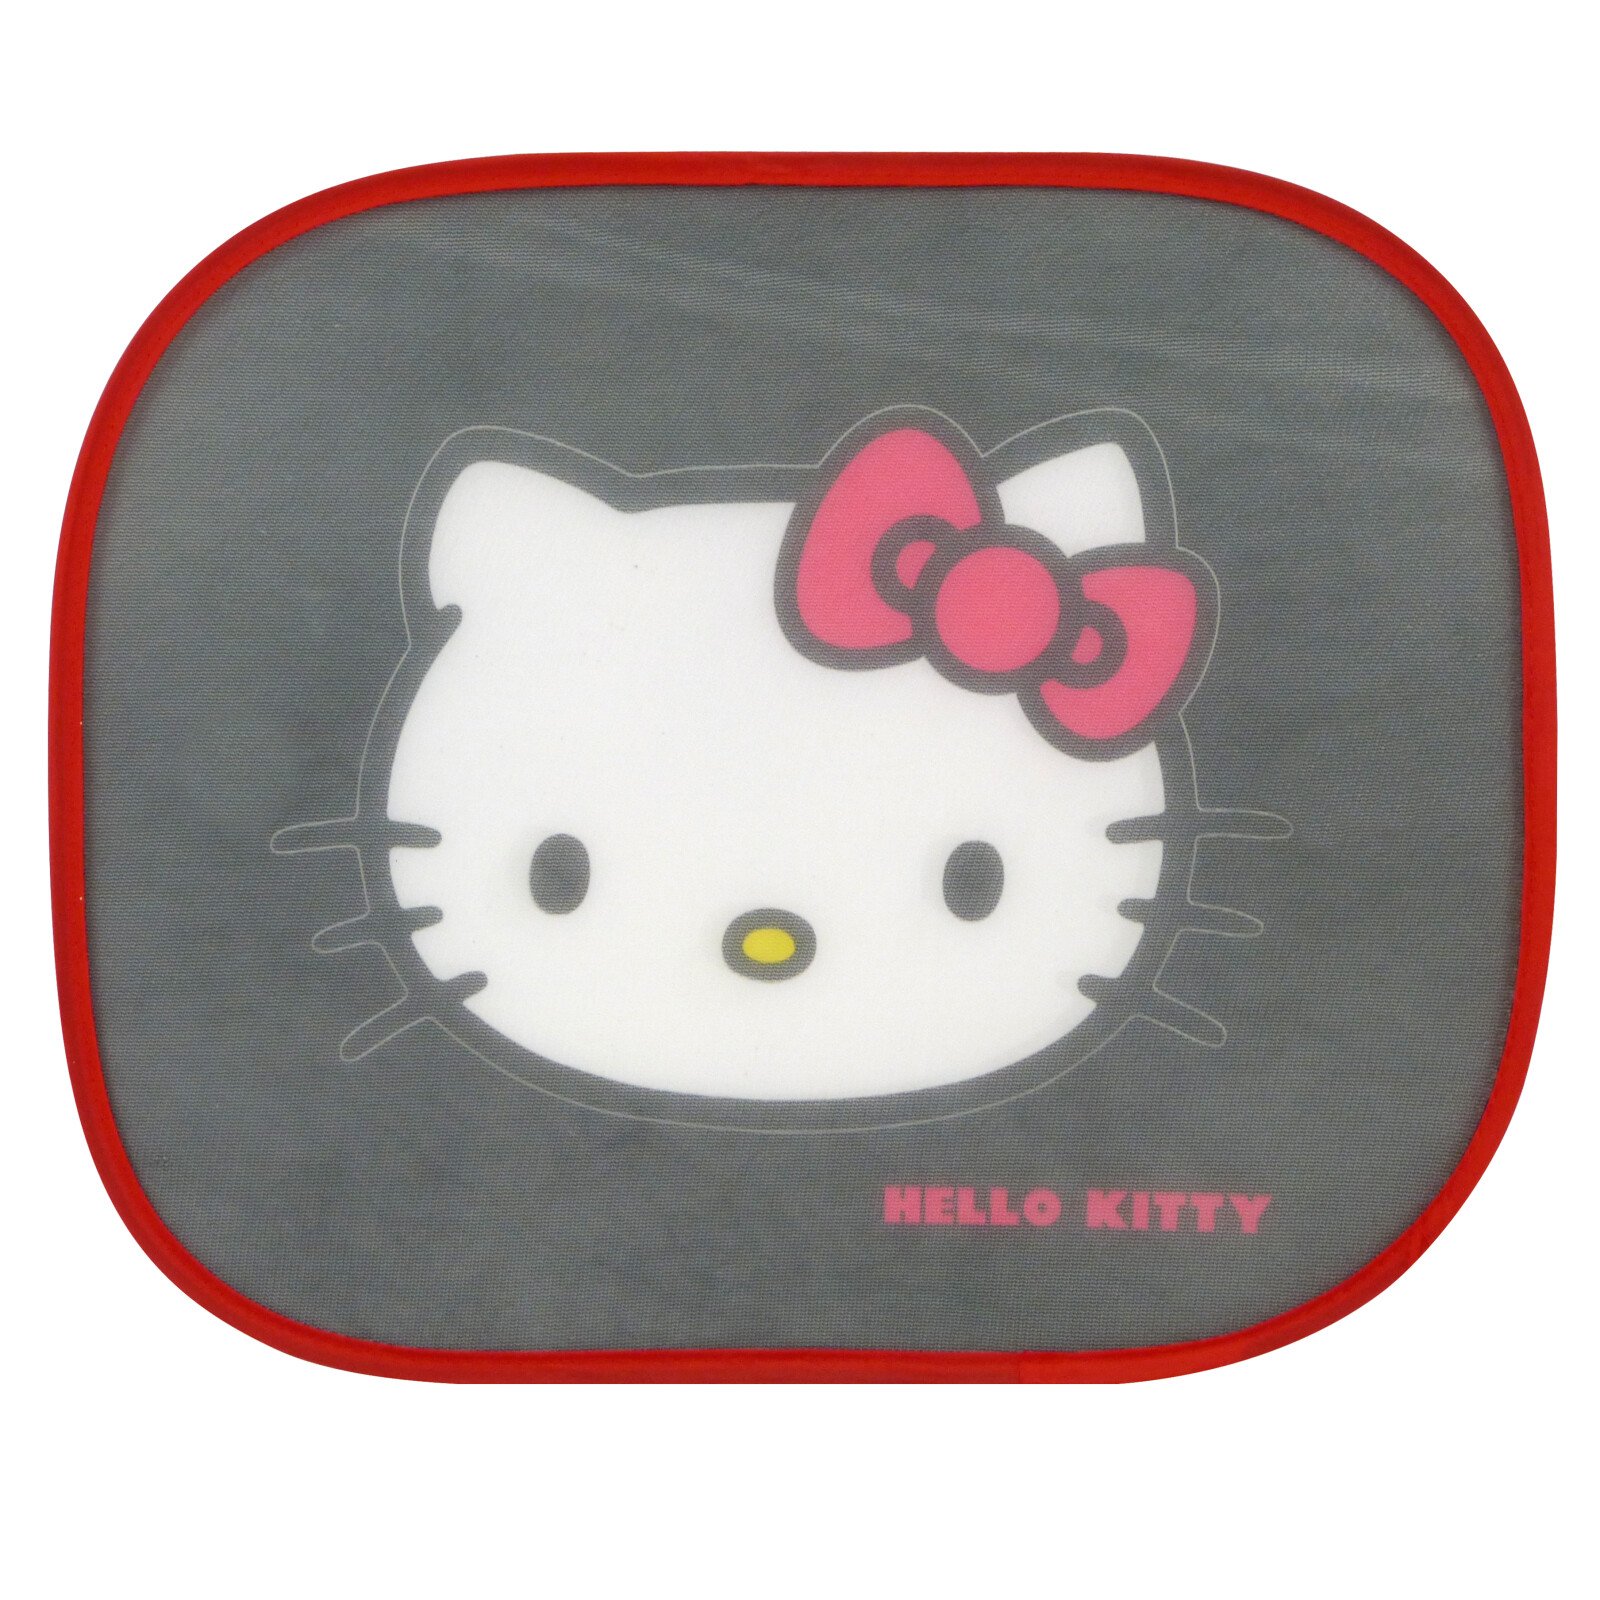 Sanrio side sunshades with suction cups 2pcs - Hello Kitty 1 thumb